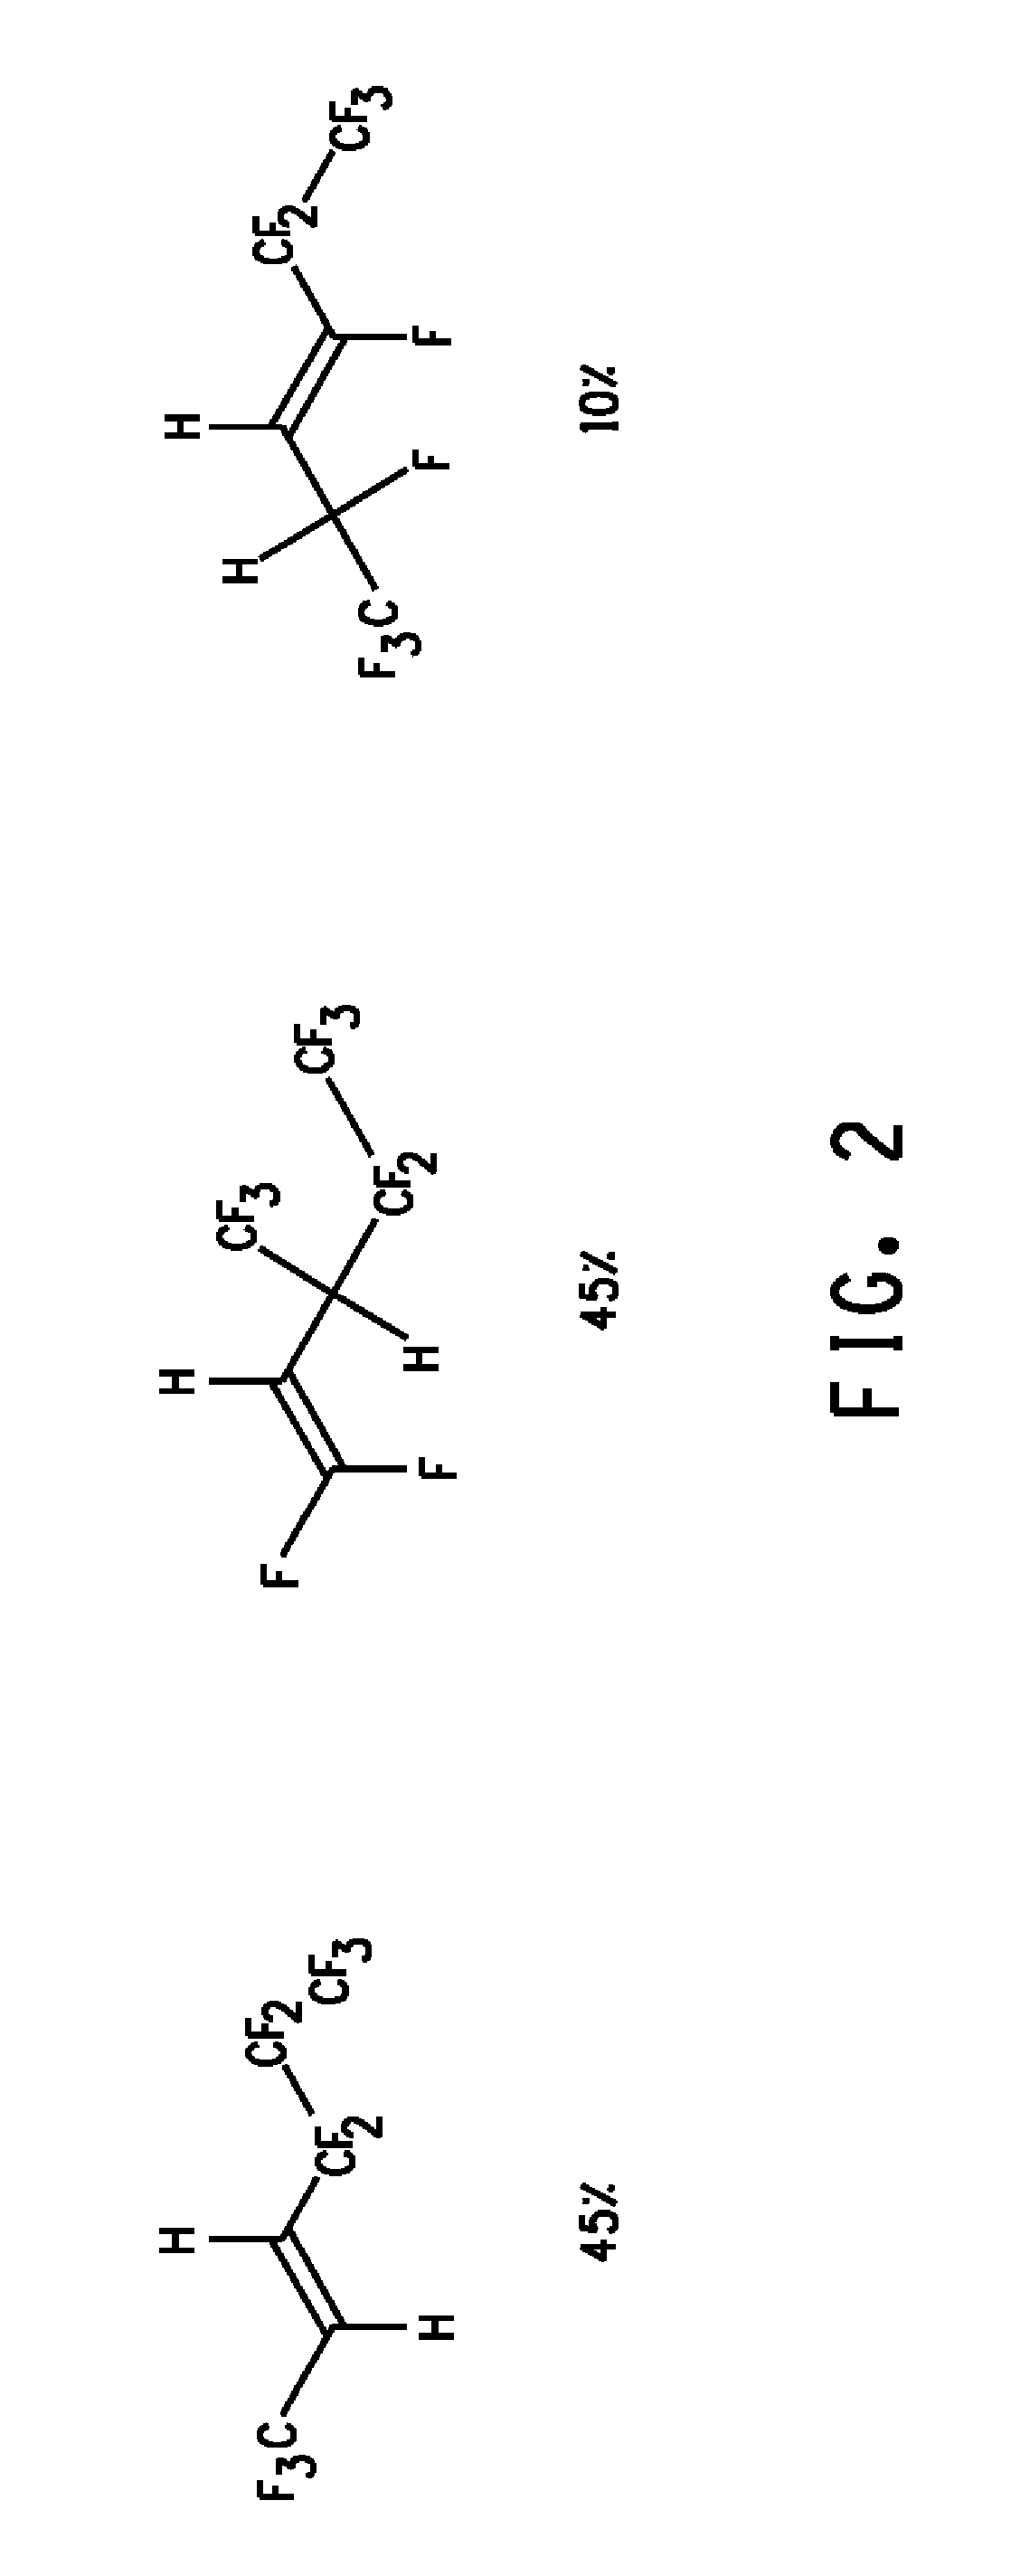 Novel 1,1,1,4,4,5,5,6,6,6-decafluorohex-2-ene isomer mixtures and uses thereof